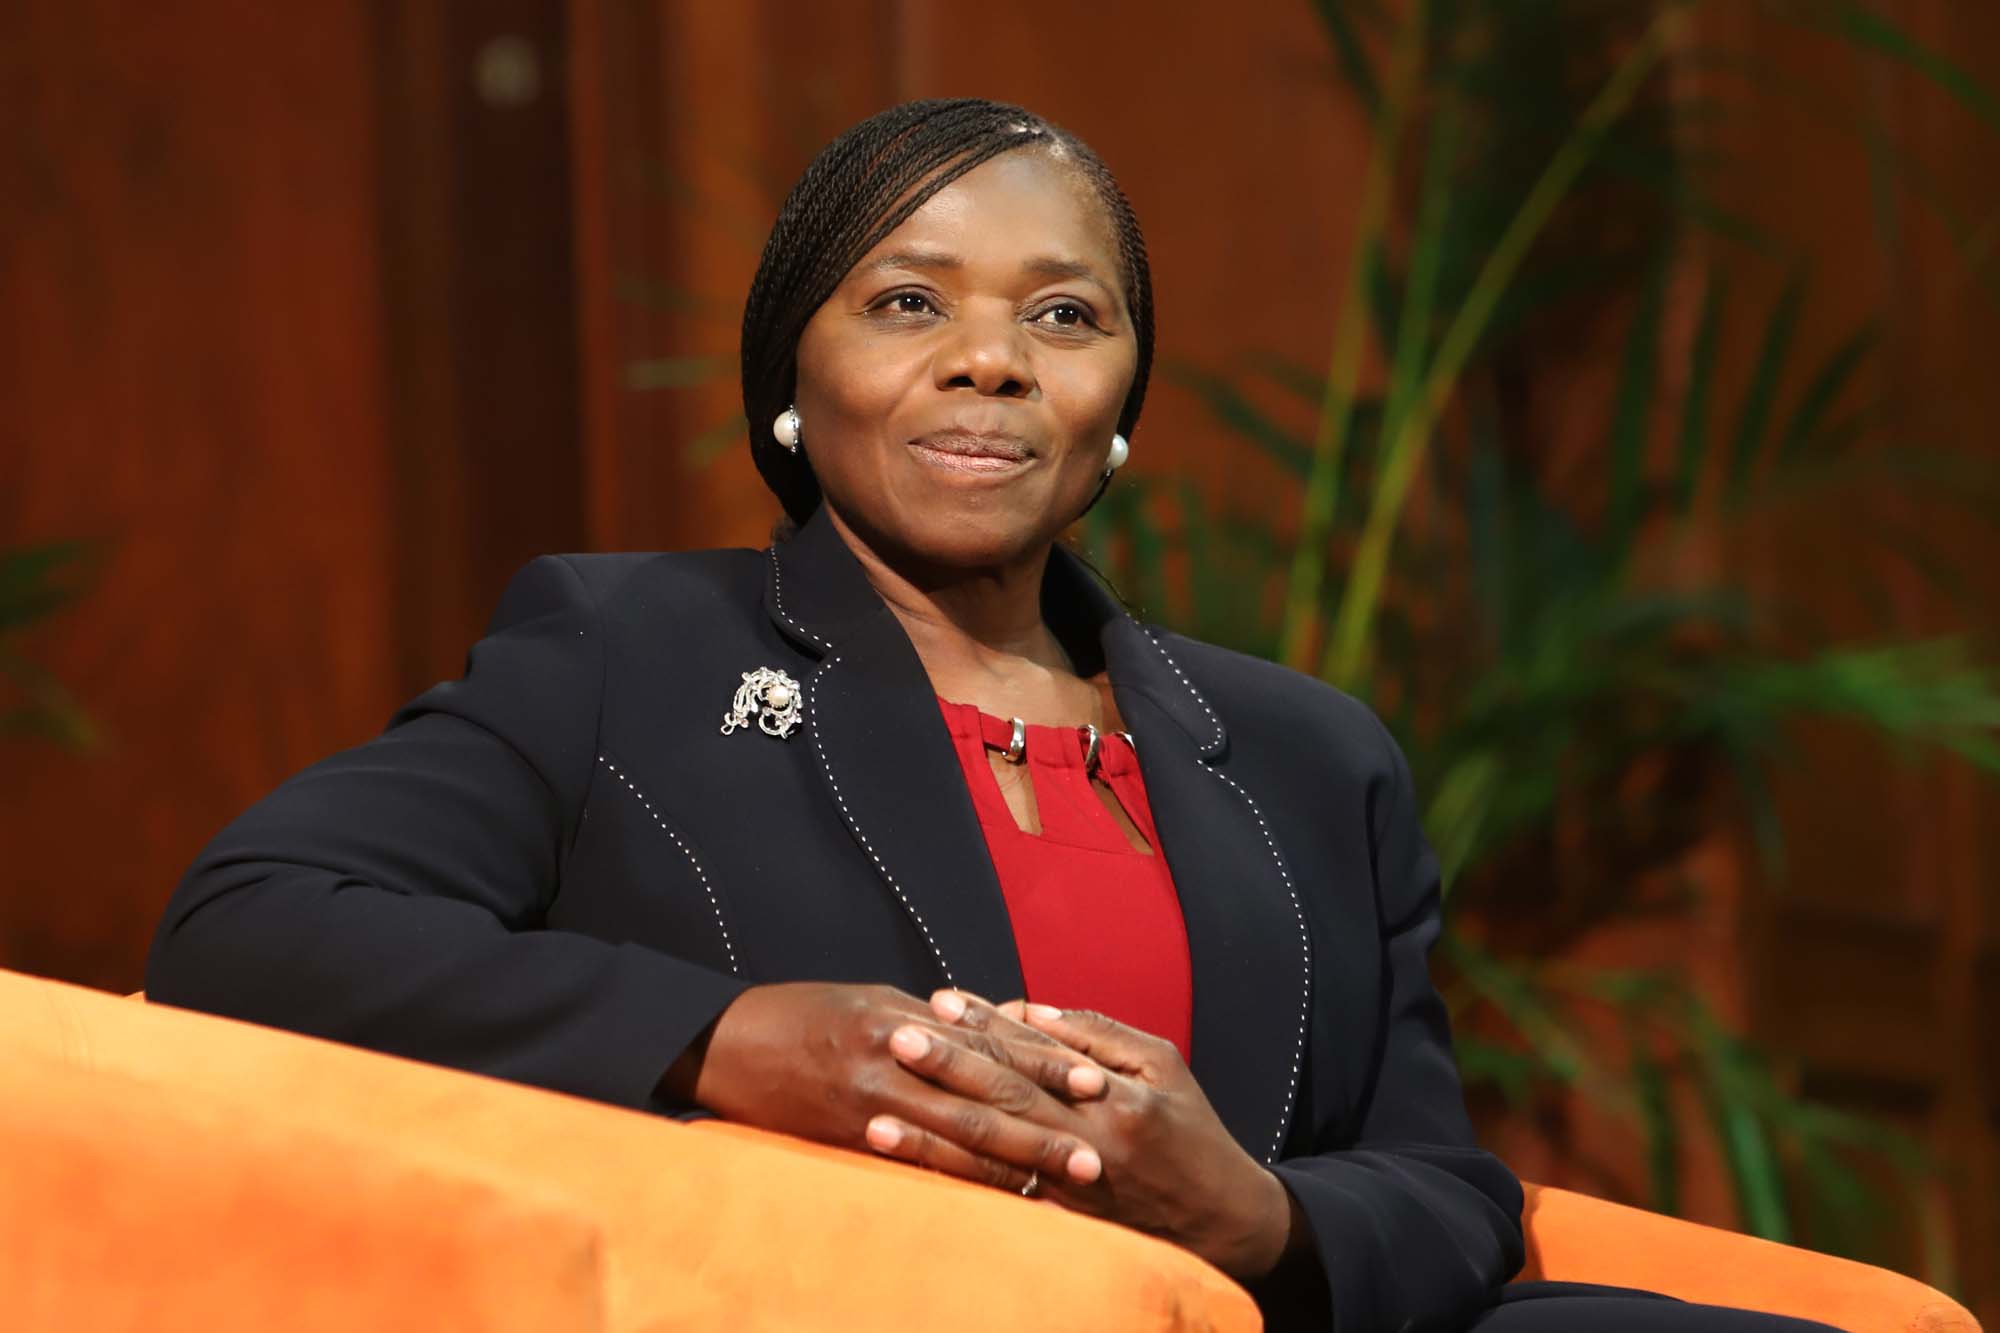 Former public protector Professor Thuli Madonsela addressed the audience at the Vice-Chancellor’s Open Lecture on 21 August.